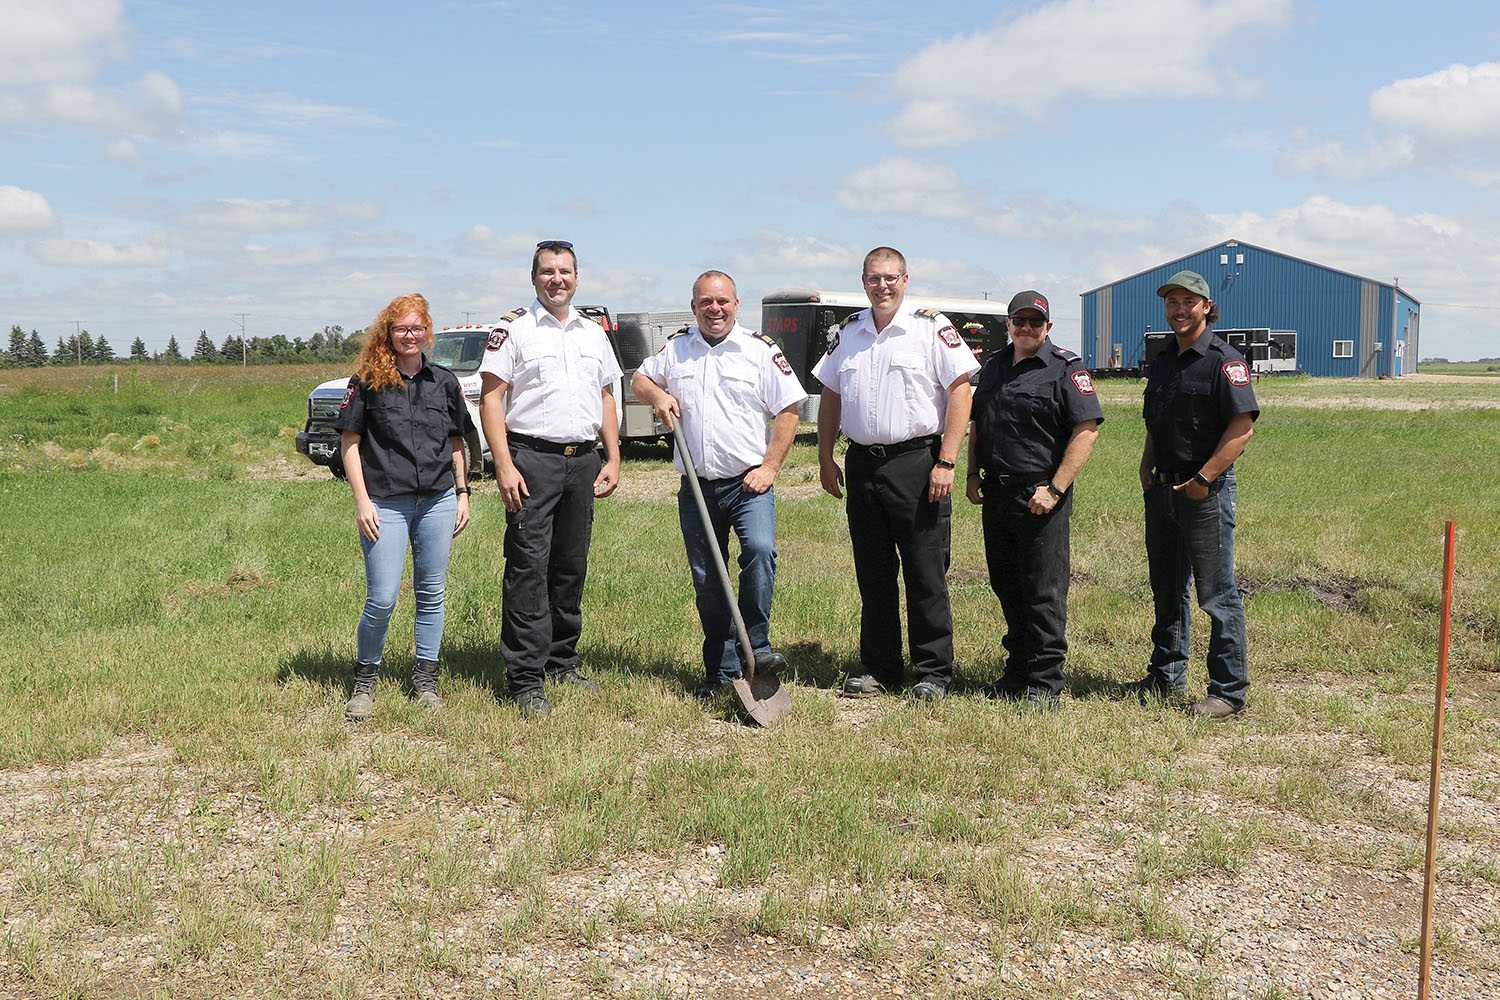 Sod turning for STARS helipad at Redvers A sod-turning was held last week for a new STARS helipad at Redvers  From left are Brittany Rowe, Doug Bennett, Brad Hutton, Wes Malin, Pat Ross, and Micheal Sylvestre with the Redvers Fire Department turning the sod for the new helipad being built by the fire hall so that STARS air ambulance can land there.